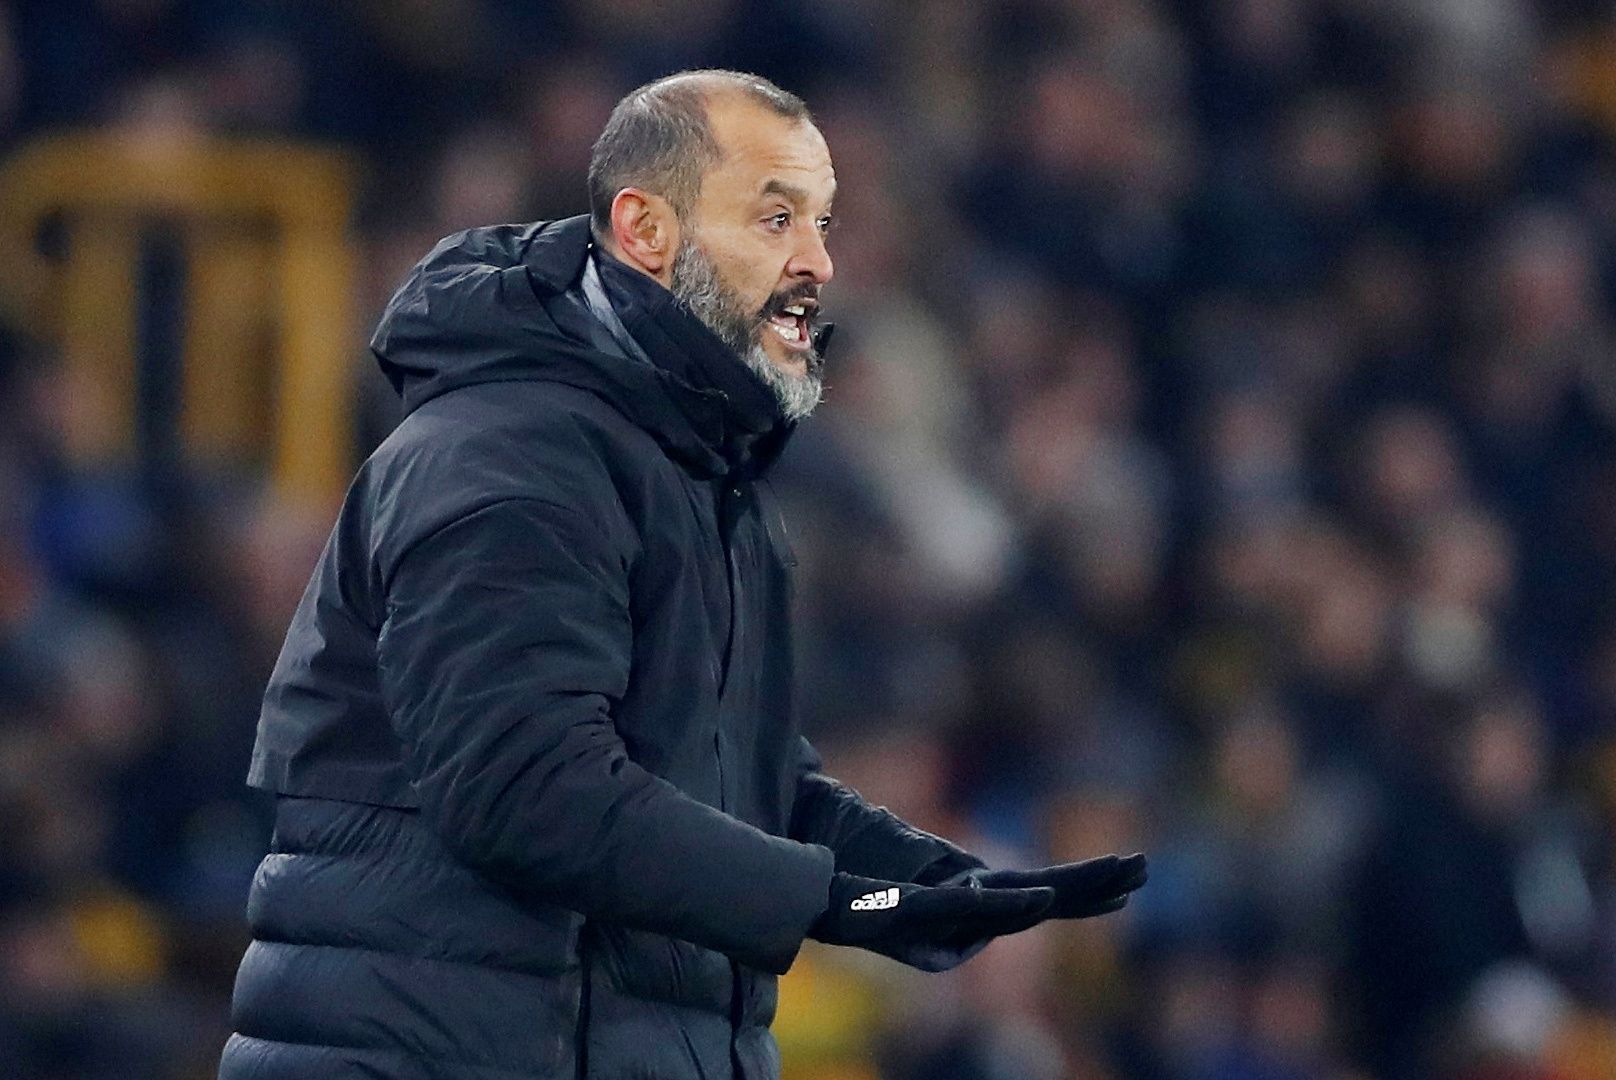 Soccer Football - Premier League - Wolverhampton Wanderers v West Ham United - Molineux Stadium, Wolverhampton, Britain - December 4, 2019  Wolverhampton Wanderers manager Nuno Espirito Santo reacts      Action Images via Reuters/Matthew Childs  EDITORIAL USE ONLY. No use with unauthorized audio, video, data, fixture lists, club/league logos or 